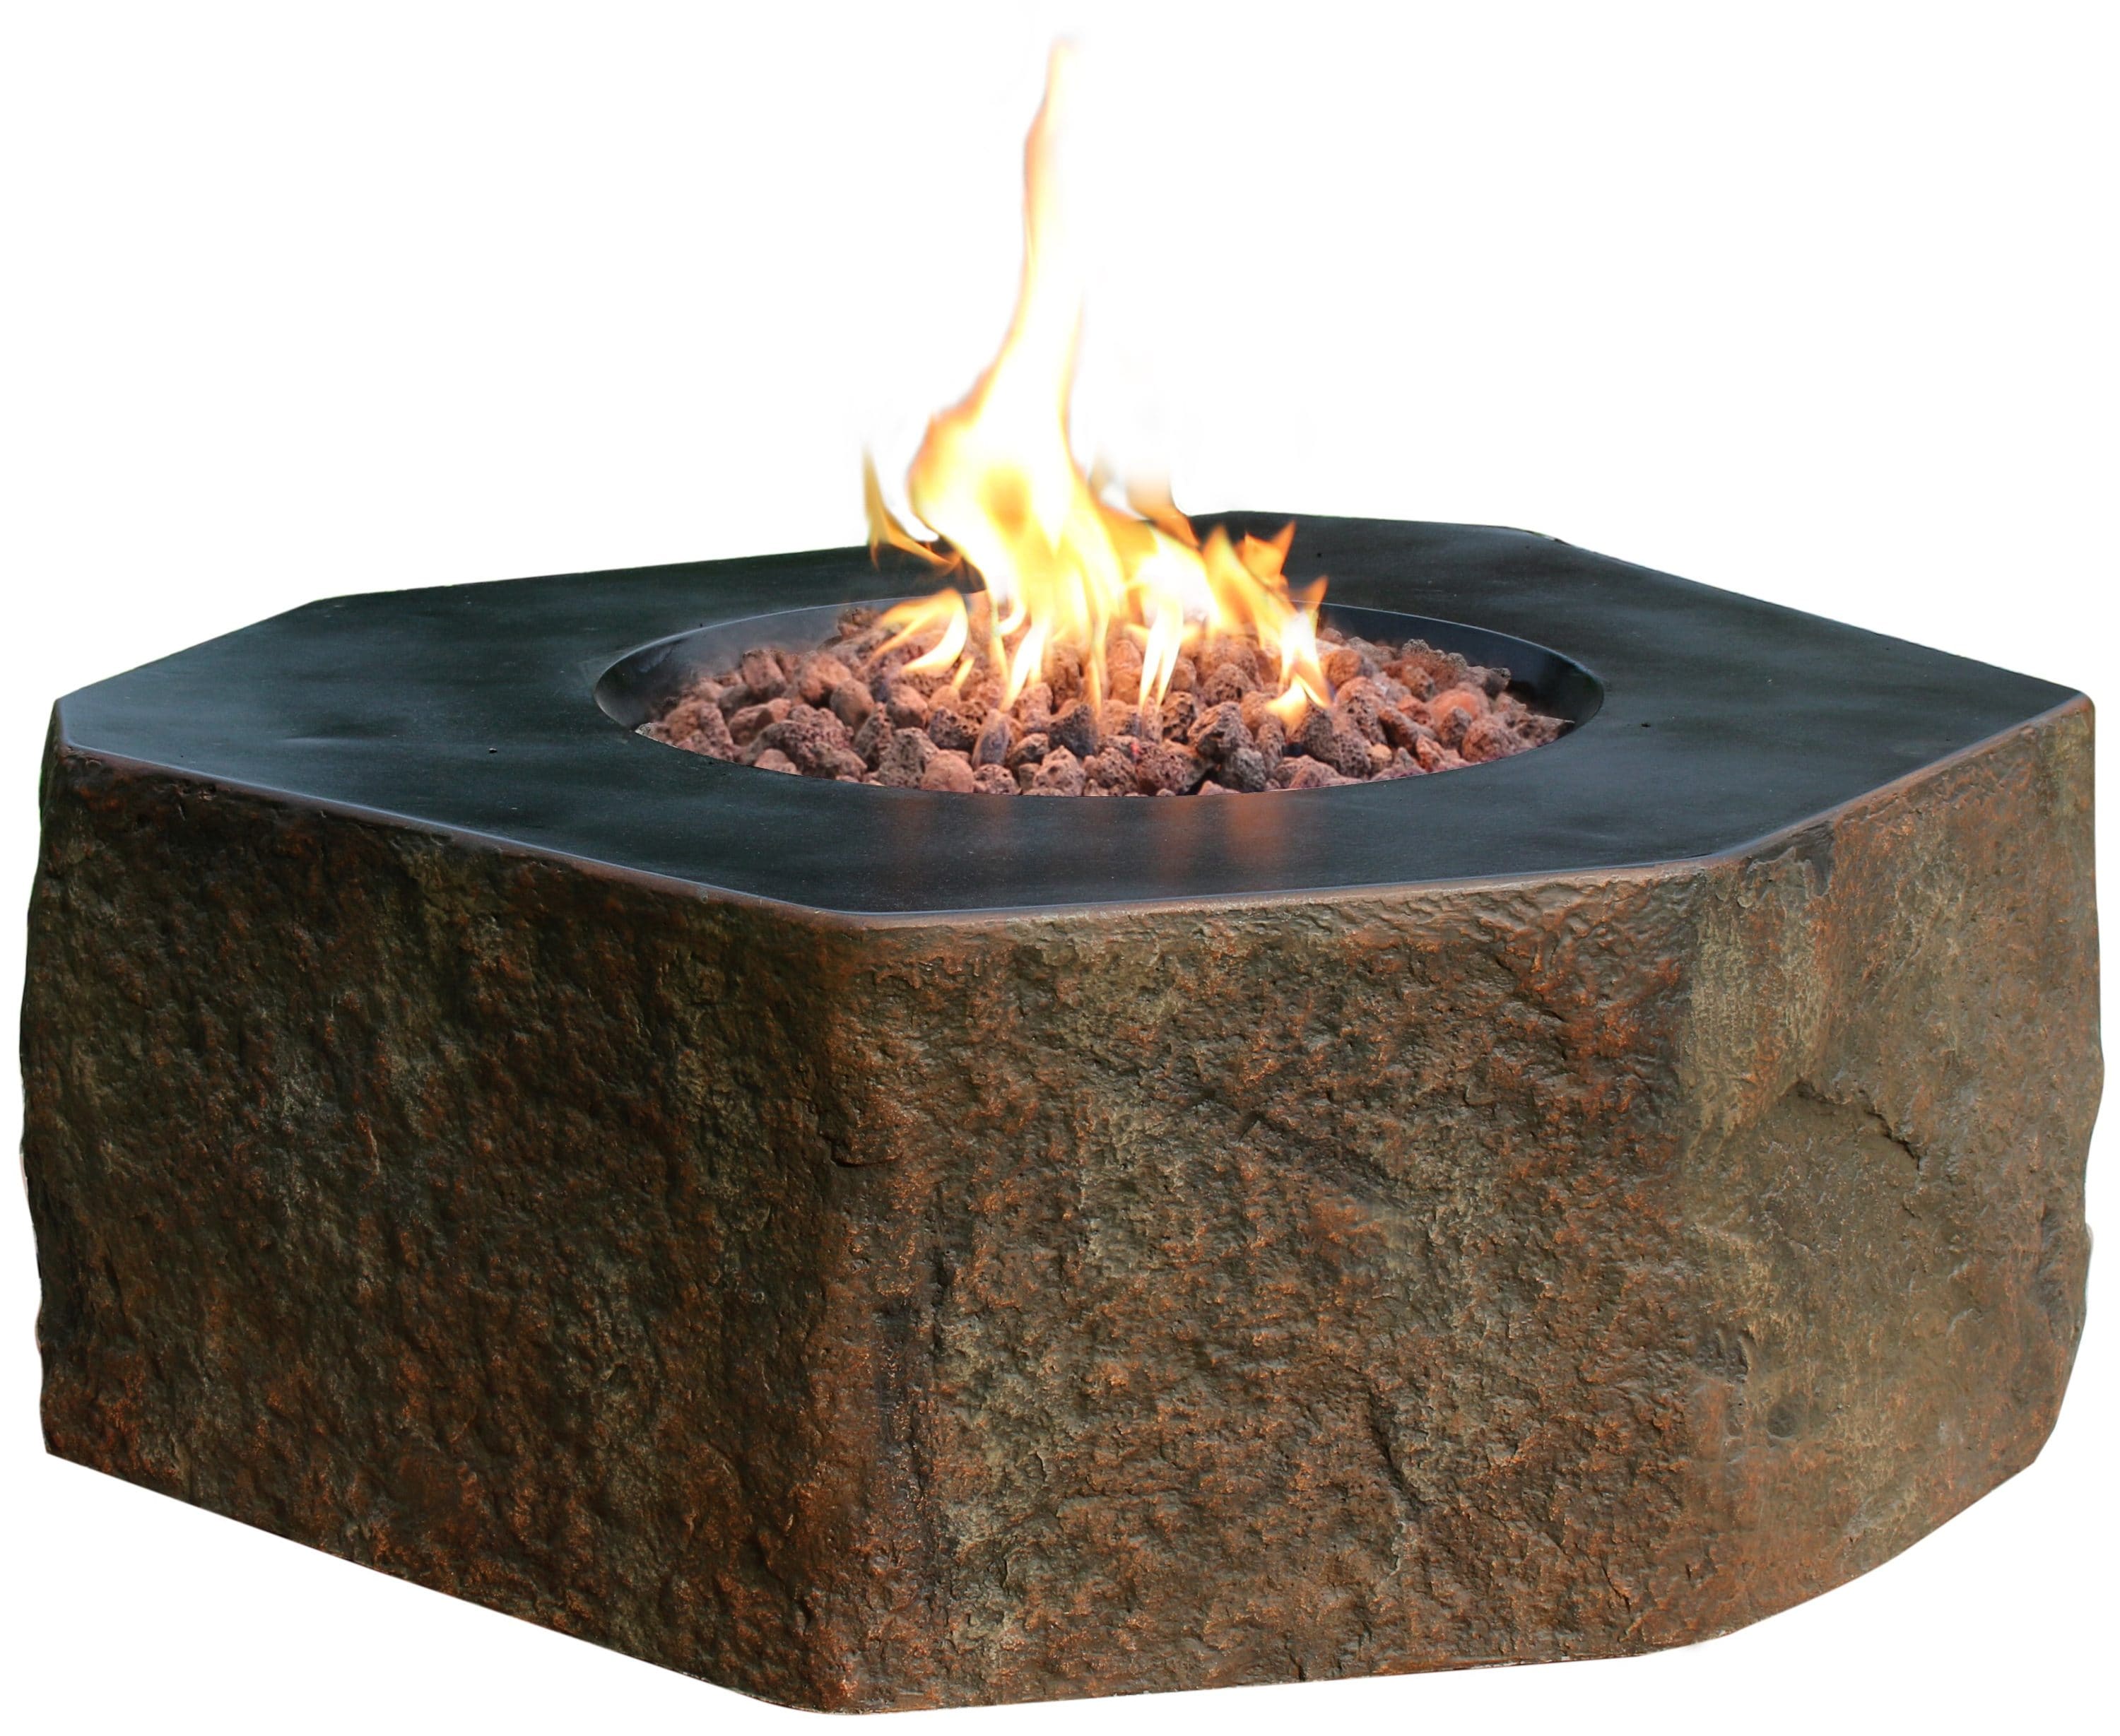 Elementi Columbia 42 In W 45000 Btu Brown Concrete Natural Gas Fire Pit In The Gas Fire Pits Department At Lowes Com